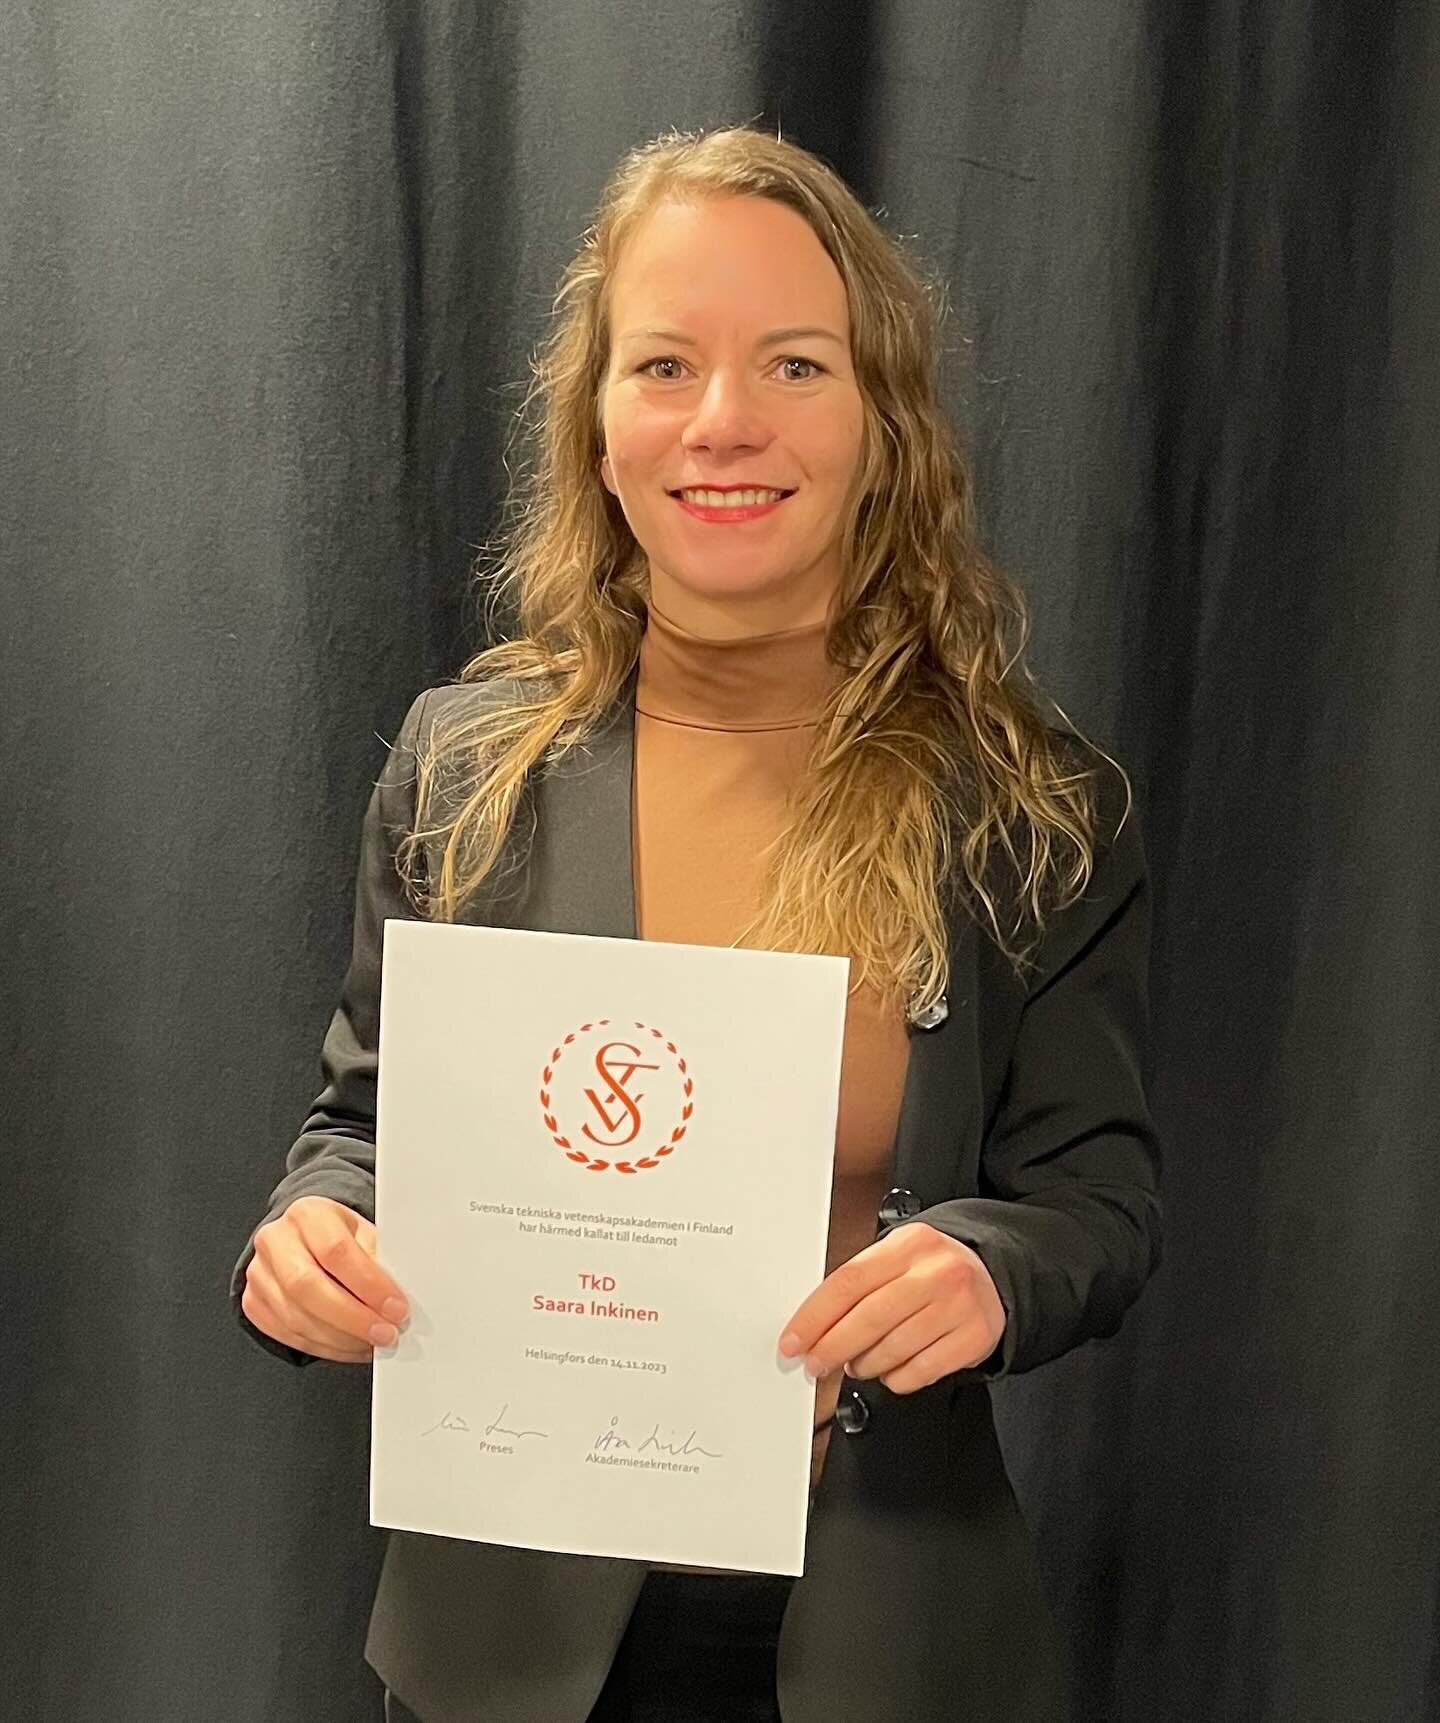 I was recently invited to become a member the Swedish Academy of Engineering Sciences in Finland (STViF). Humbled for this recognition and looking forward to contributing to the development of the Finnish science ecosystem together with STViF in the 